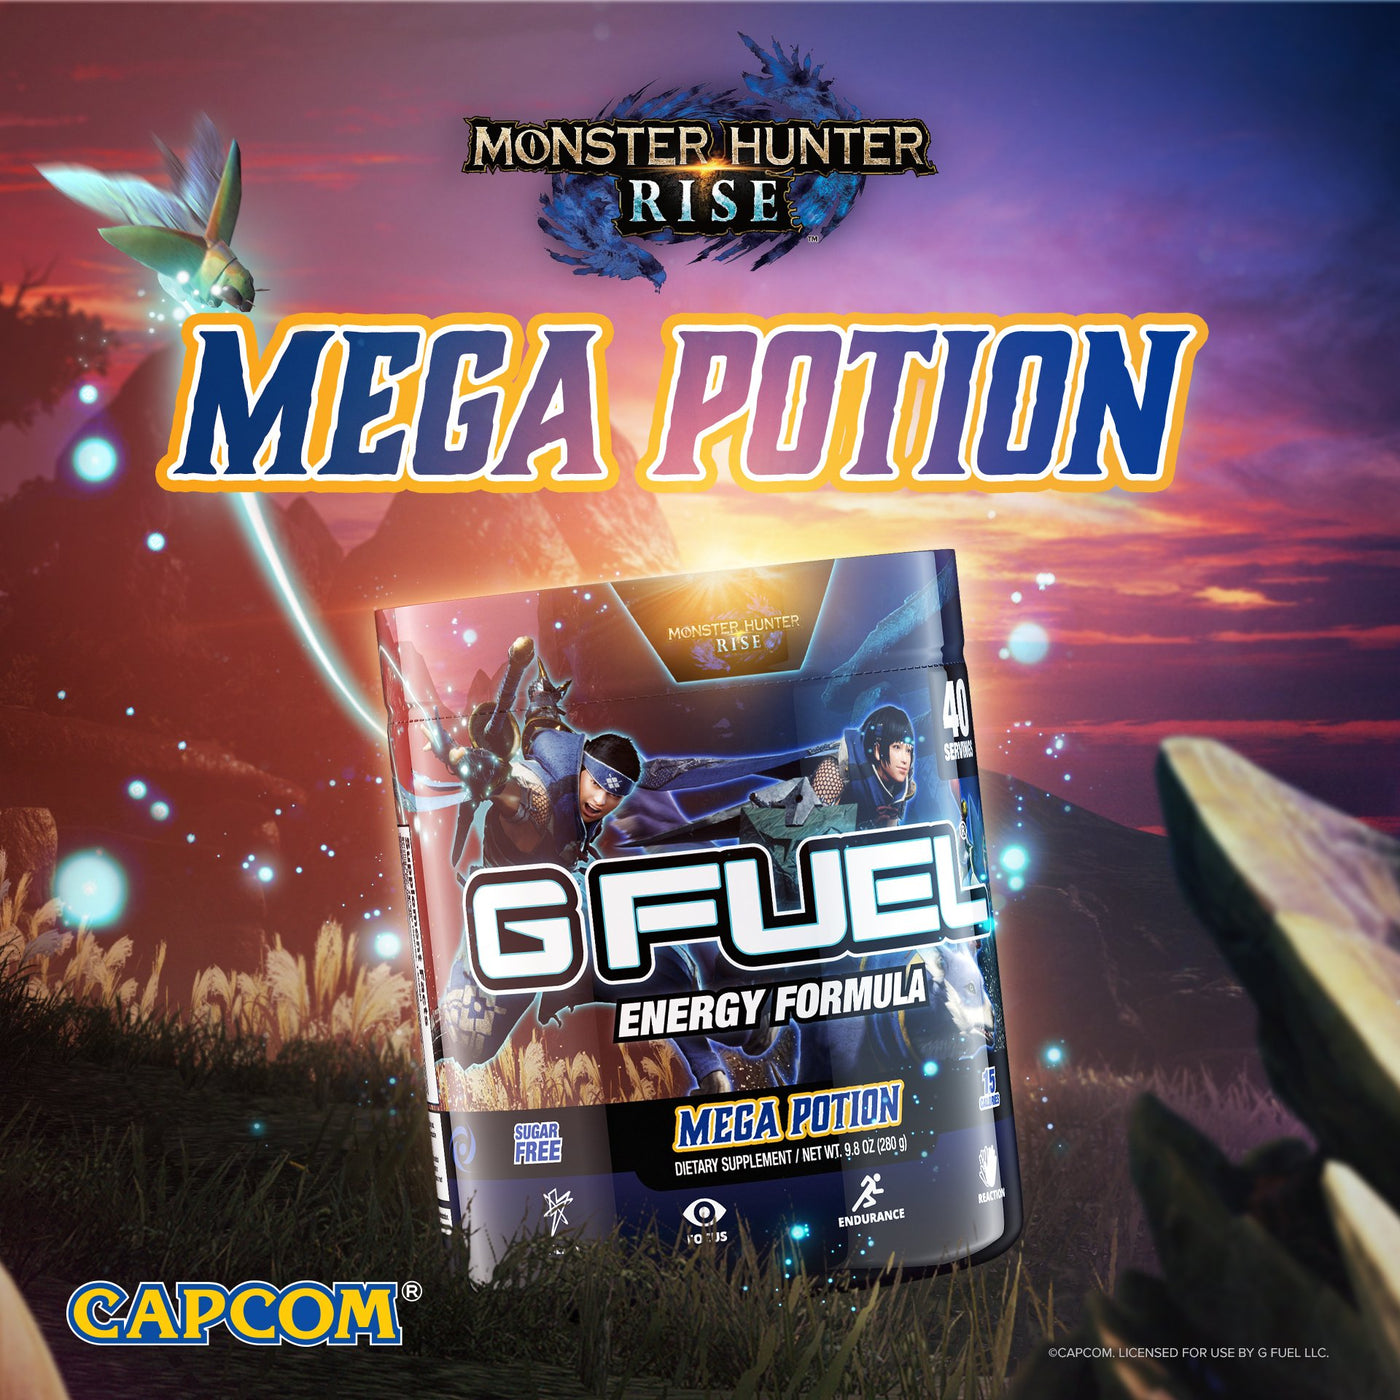 G FUEL Mega Potion tub, inspired by Monster Hunter Rise and developed in partnership with CAPCOM